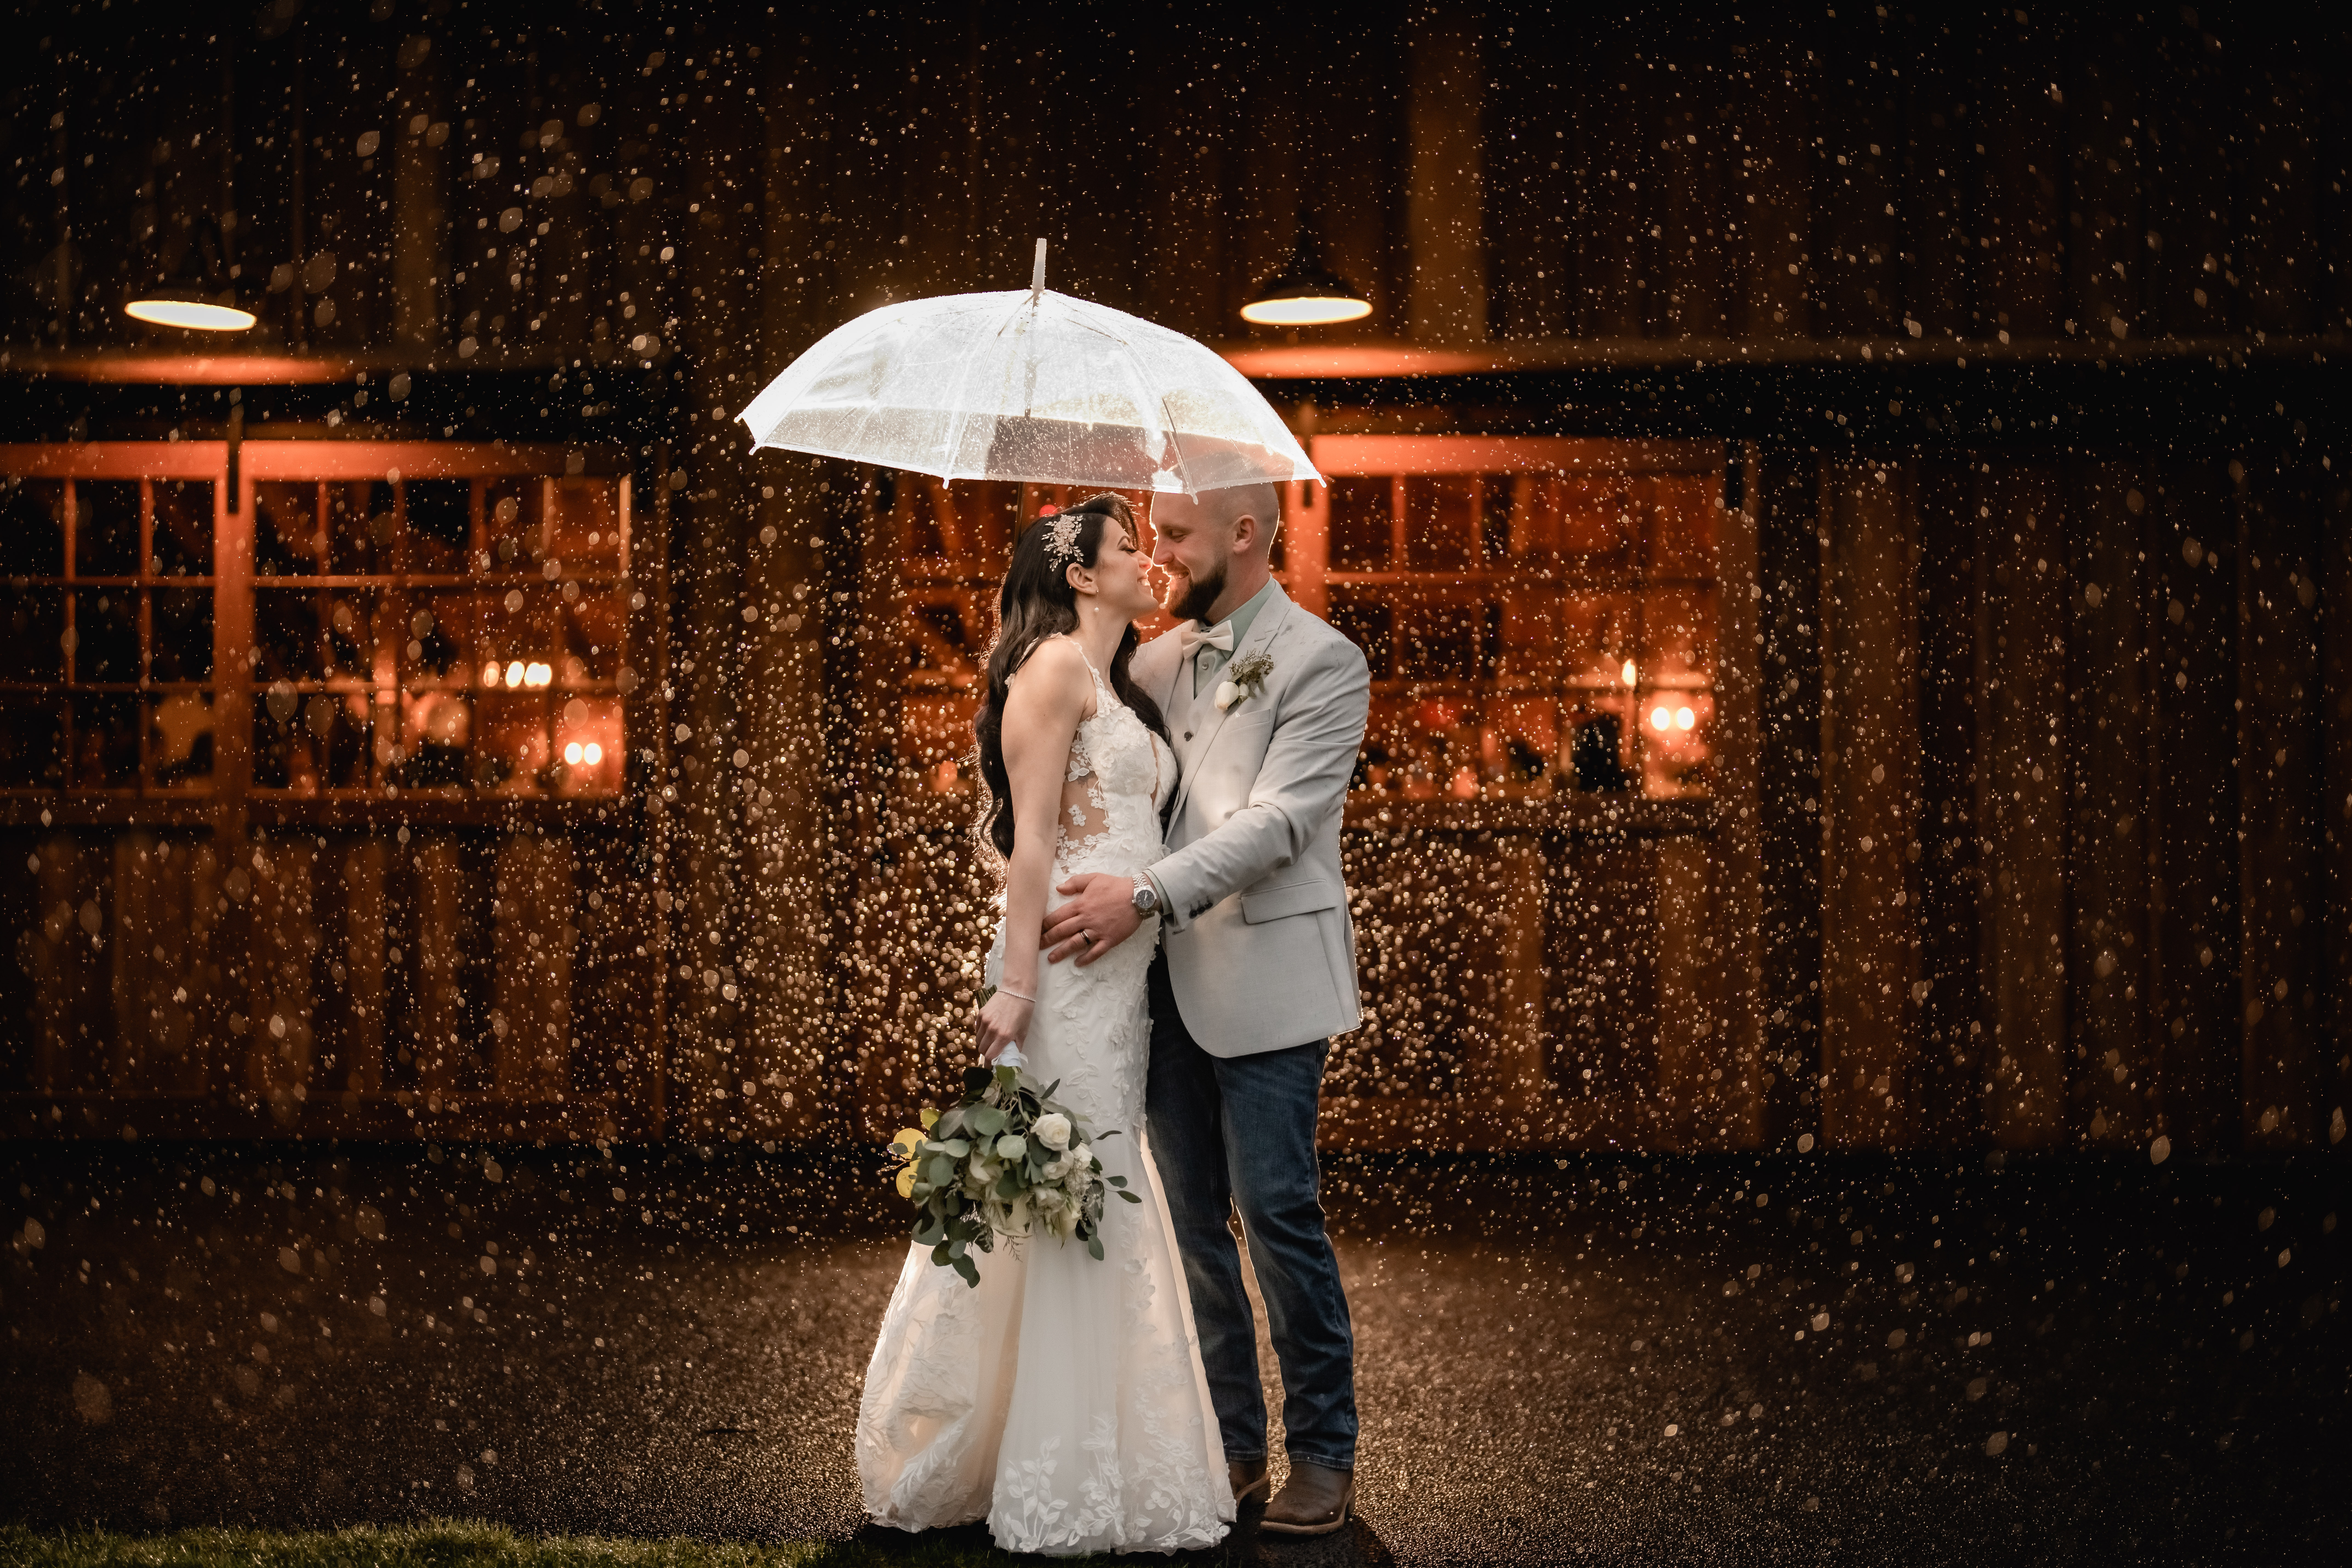 New Jersey Wedding Photographer, Rainy Day Wedding Photographer, New Jersey Wedding Venues, NJ Wedding Photographer, Unique Wedding Ideas, New Jersey Creative Photographer, Modern Wedding Couple, Wedding Inspiration, Wedding, photo of bride and groom smiling at each other under a clear umbrella while the rain and them are being back lit by a warm light